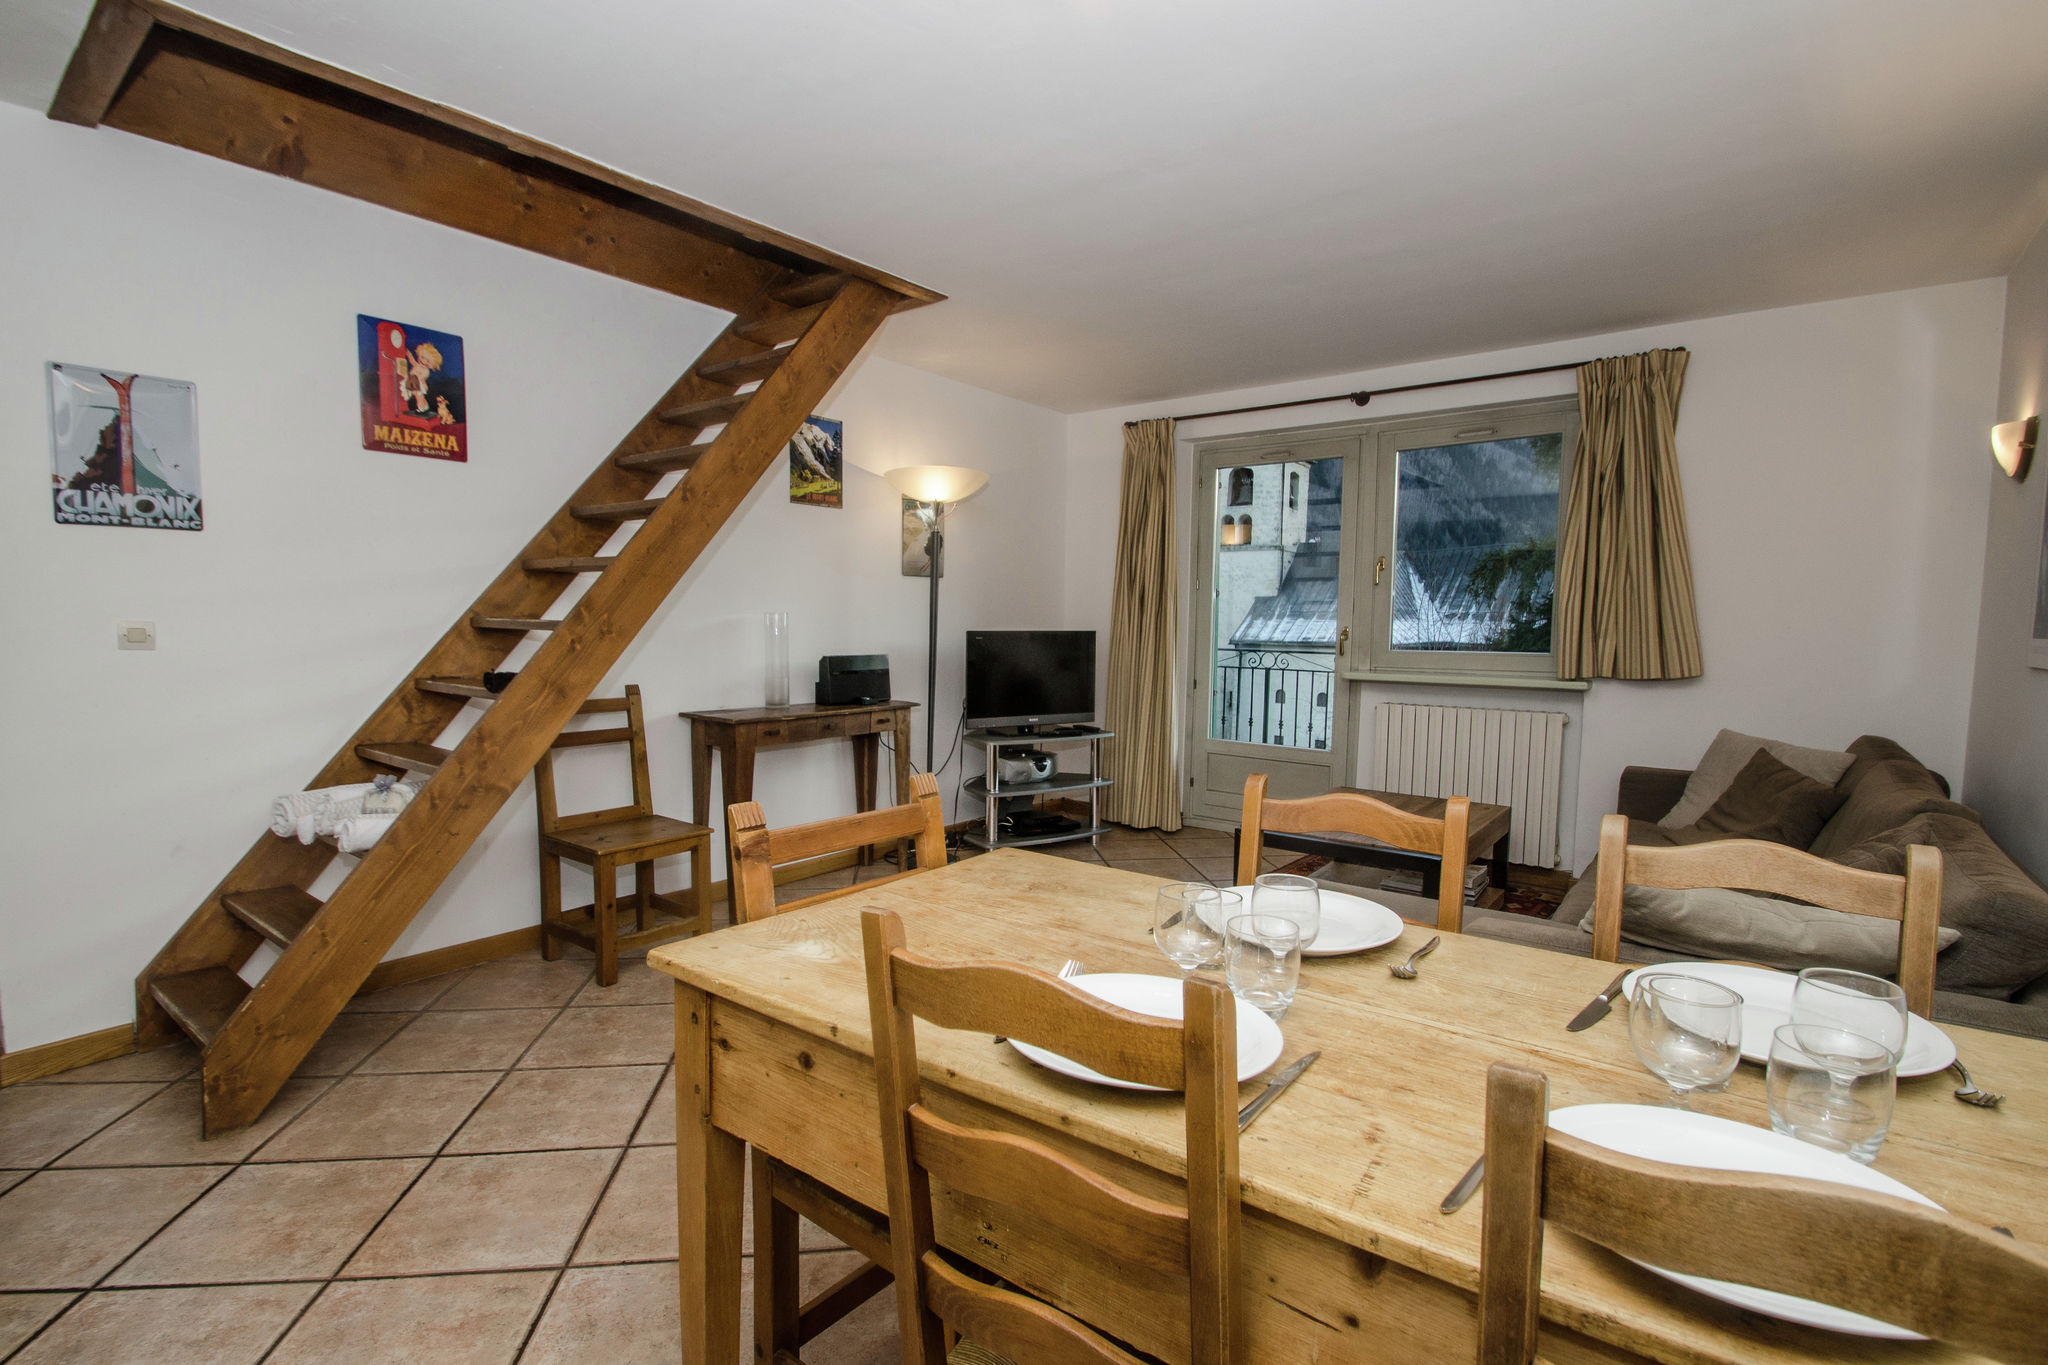 A very beautiful and cosy 80 sq.m appartment situated in the center of Chamonix.